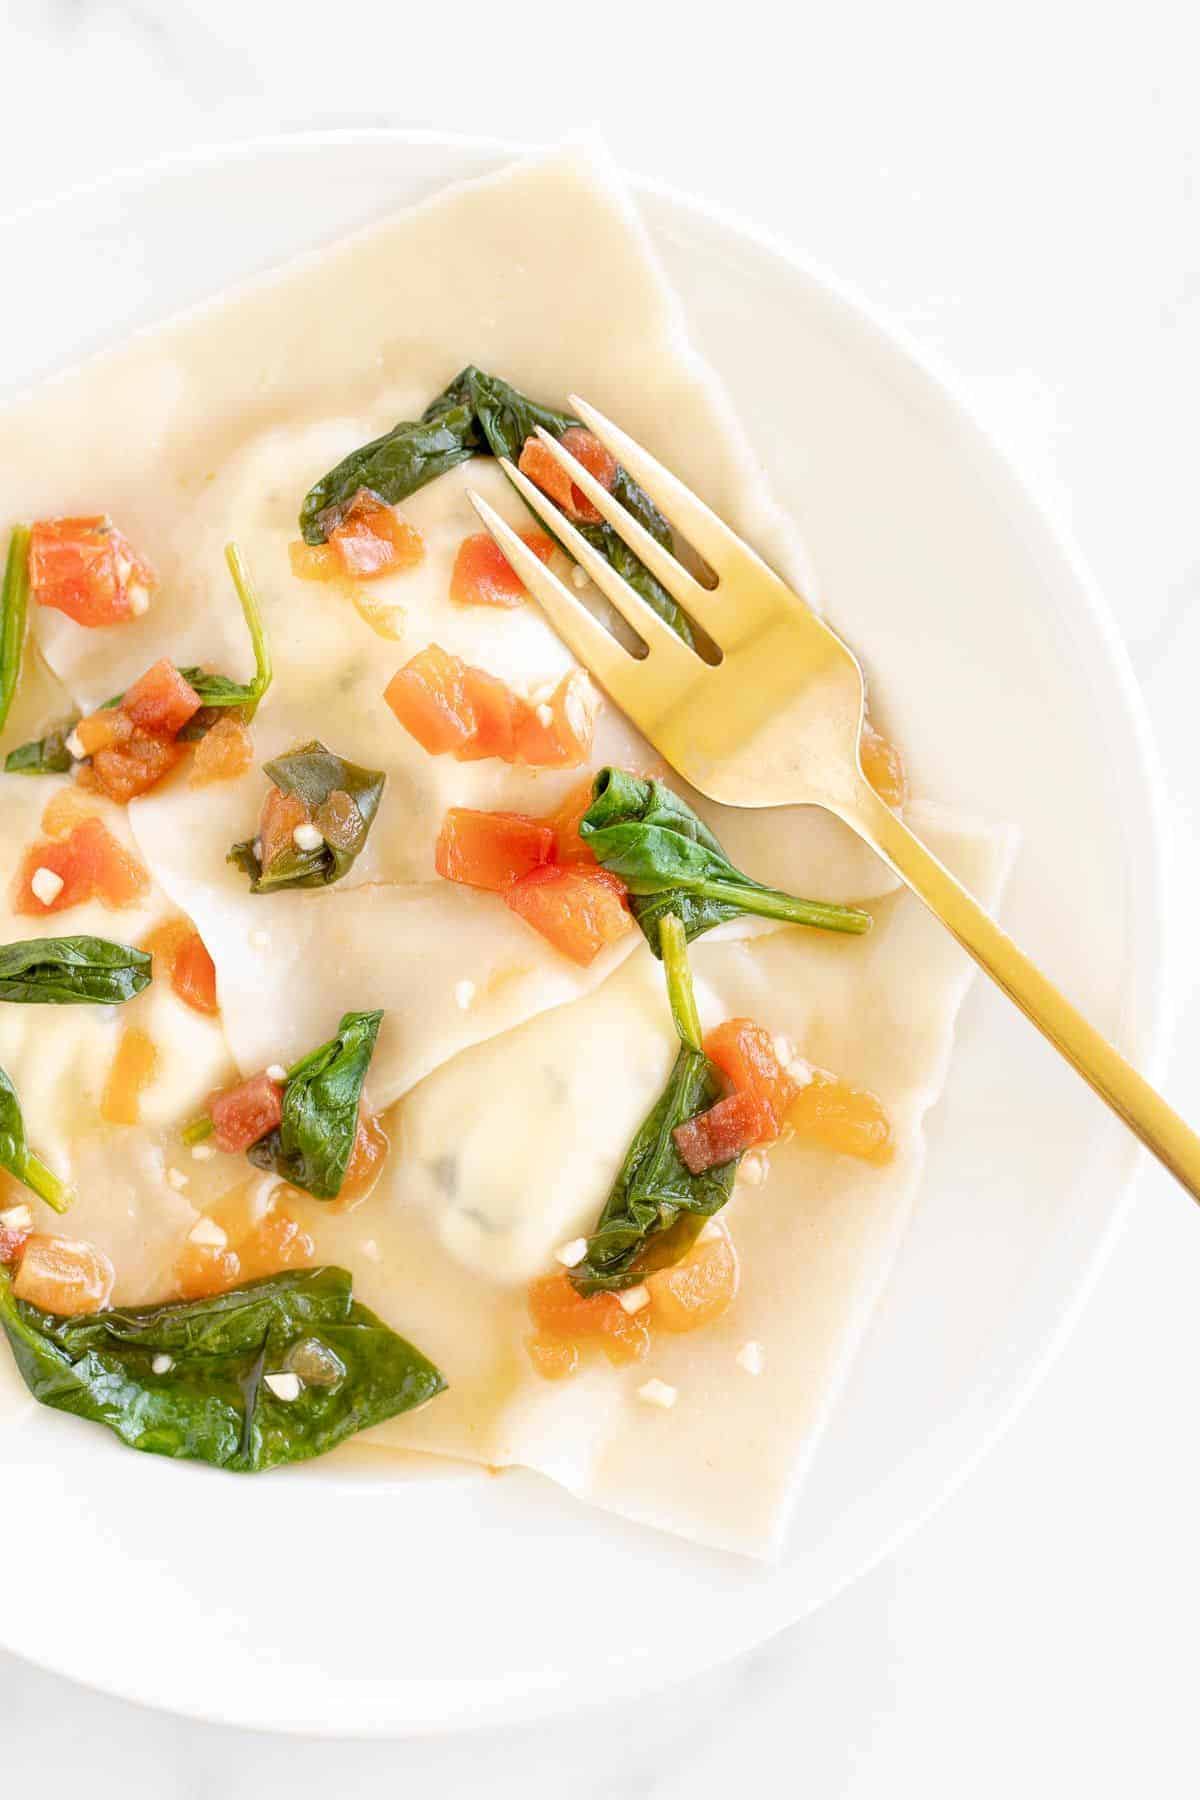 A plate of goat cheese ravioli topped with a spinach and tomato based sauce.